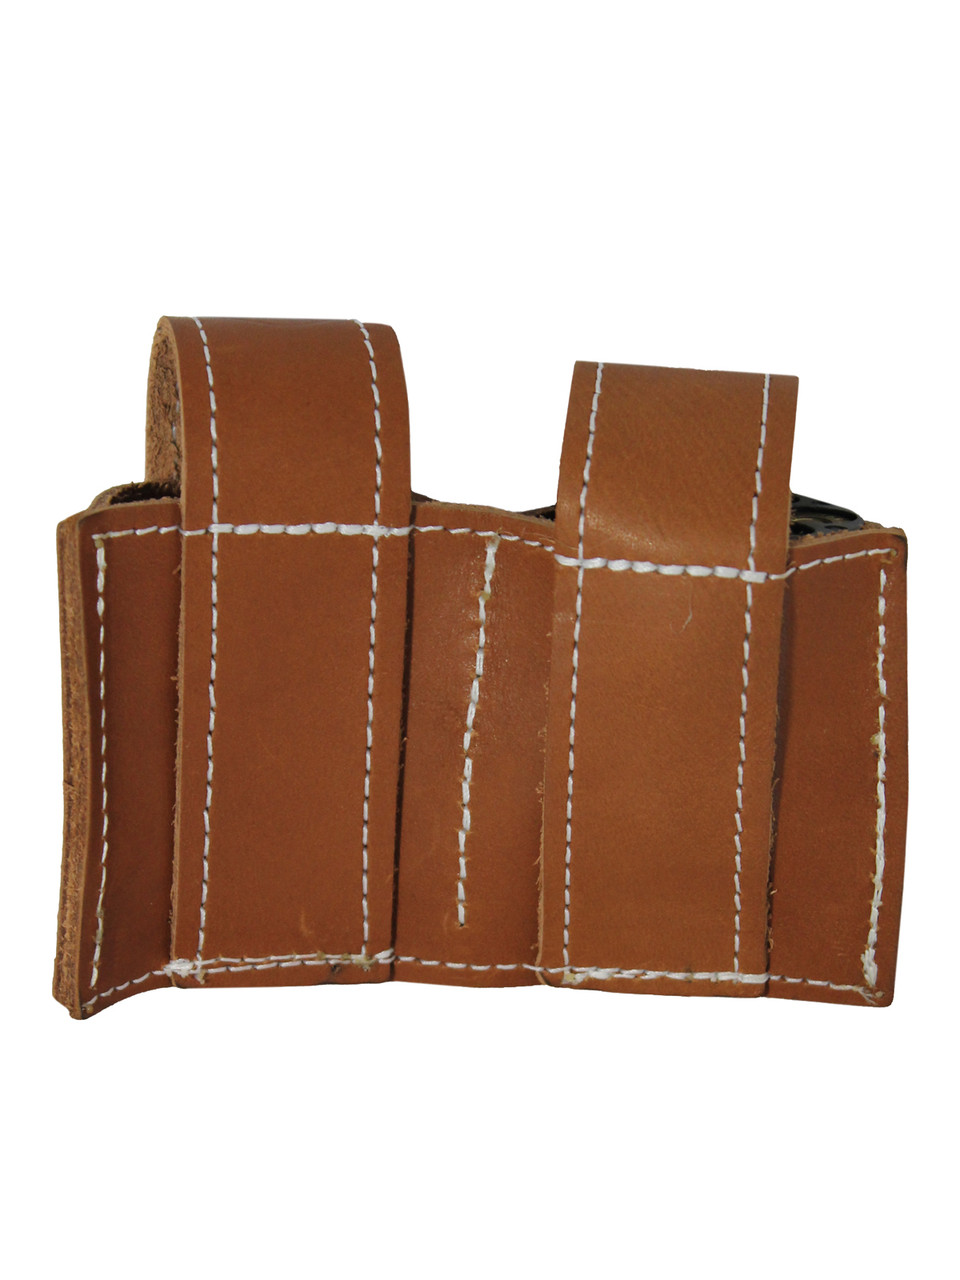 Saddle Tan Leather Revolver Double Speed-loader Pouch for 6 shot .44 Mag